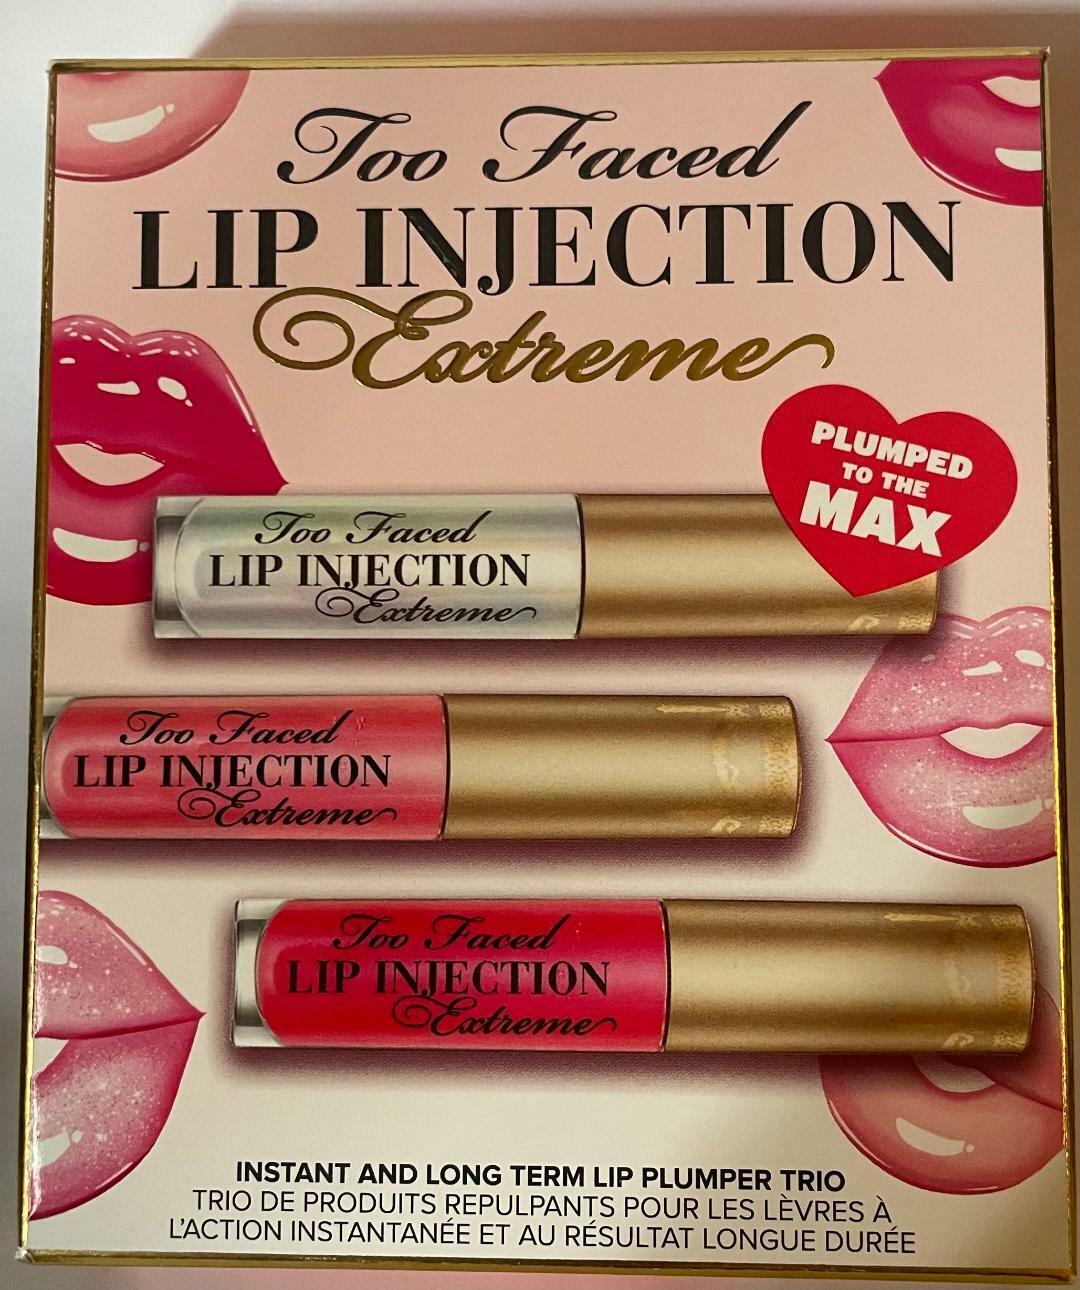 Max In a popularity 84% OFF Too Faced Lip Injection Plumped Set. Extreme the to Plumper